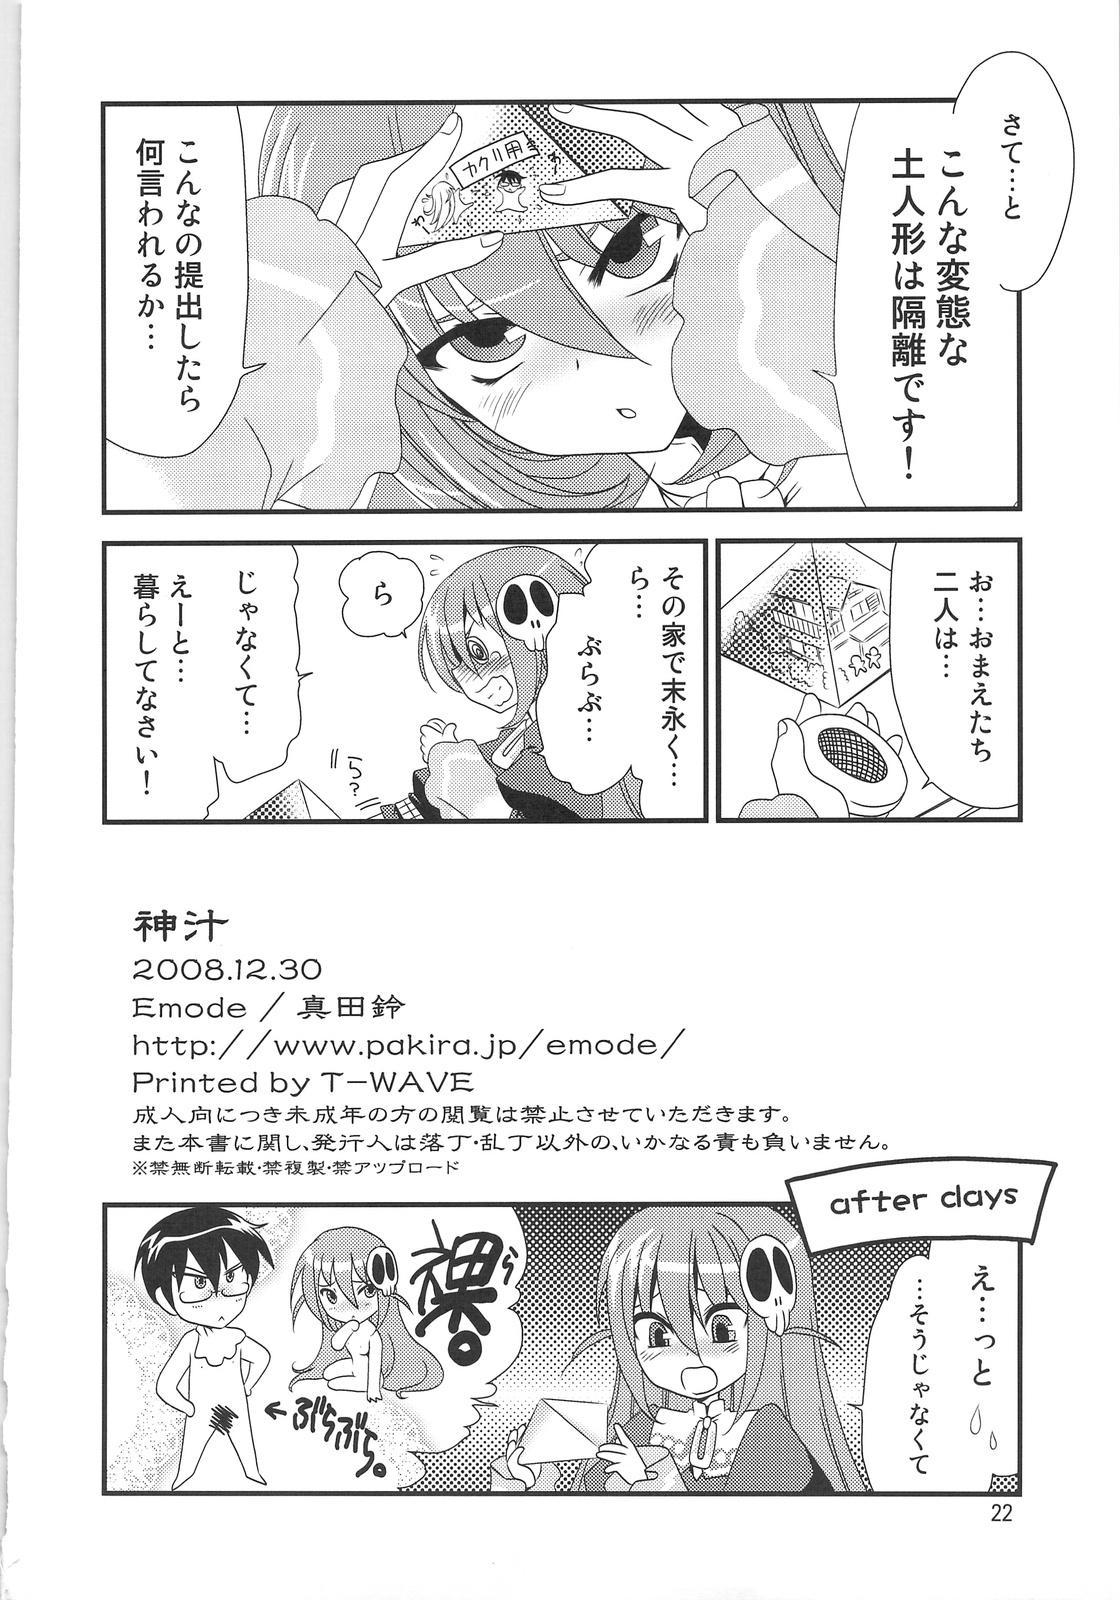 Fudendo Kami Shiru - The world god only knows Friends - Page 21